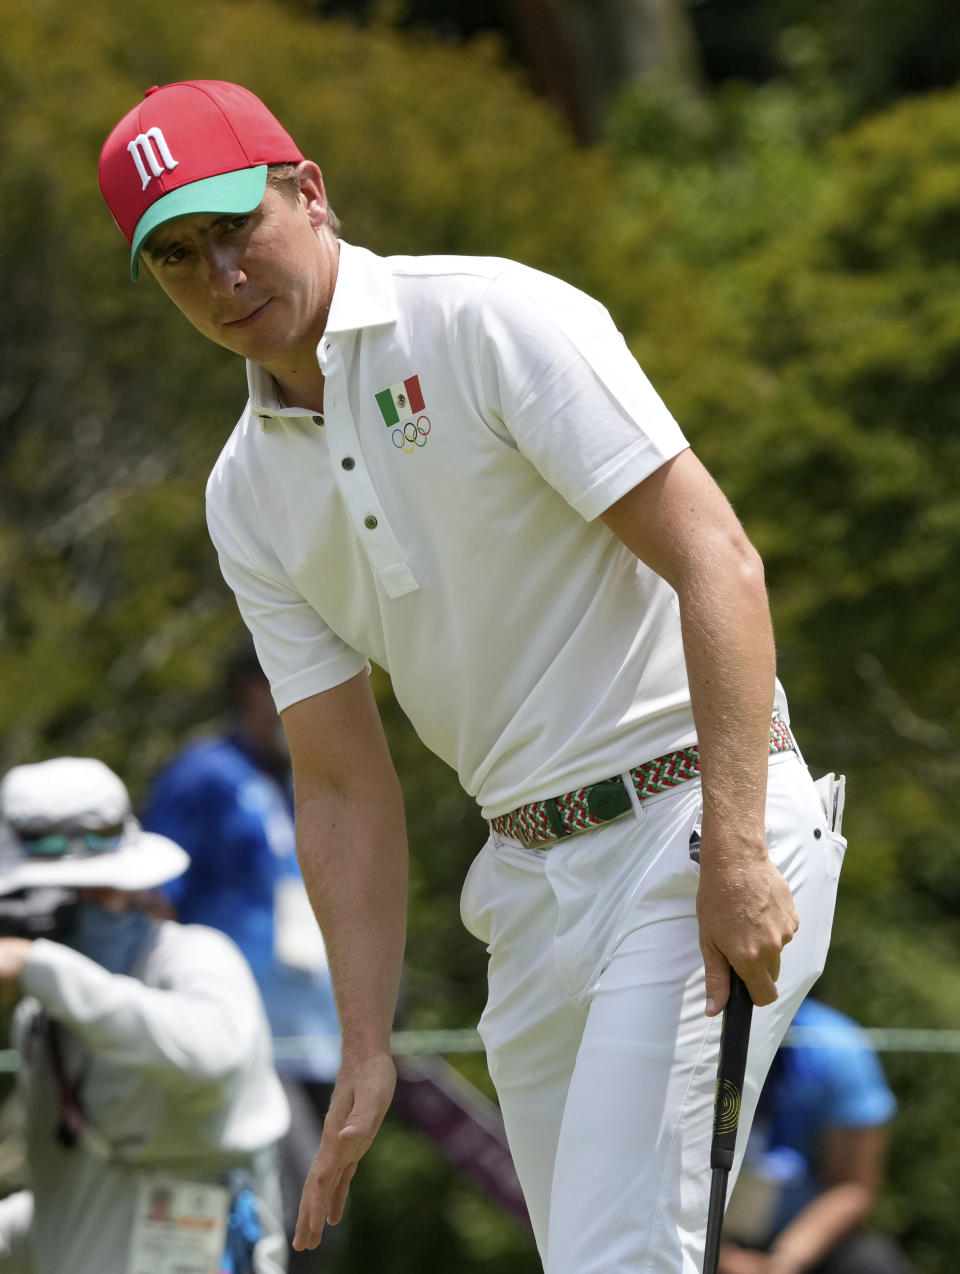 Carlos Ortiz of Mexico reacts after missing a putt on the second hole during the third round of the men's golf event at the 2020 Summer Olympics on Saturday, July 31, 2021, in Kawagoe, Japan. (AP Photo/Andy Wong)